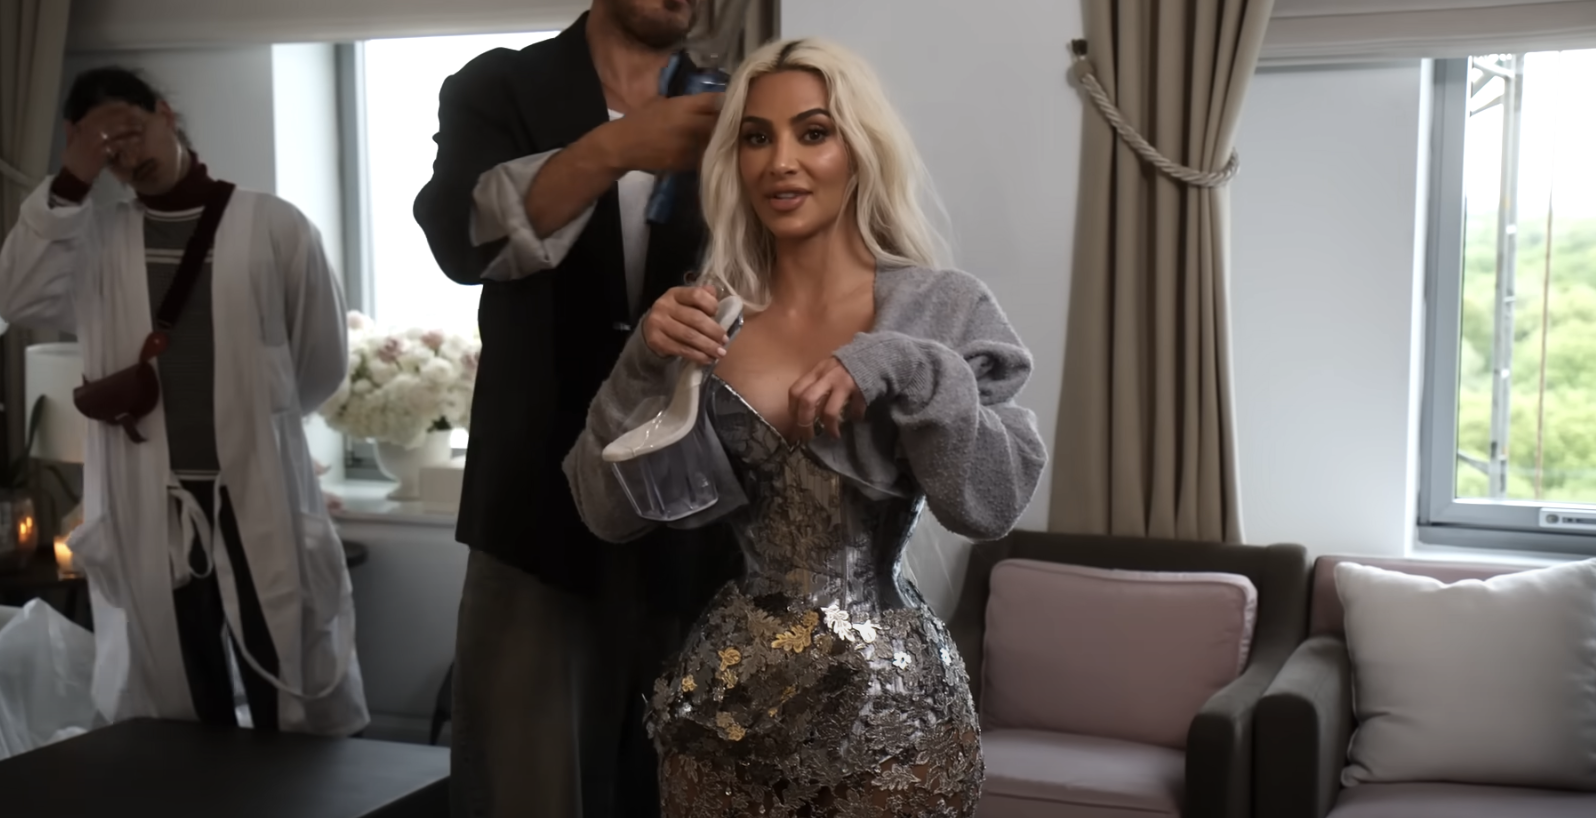 Kim Kardashian in a glittery fitted dress holding a glass while a stylist adjusts her hair